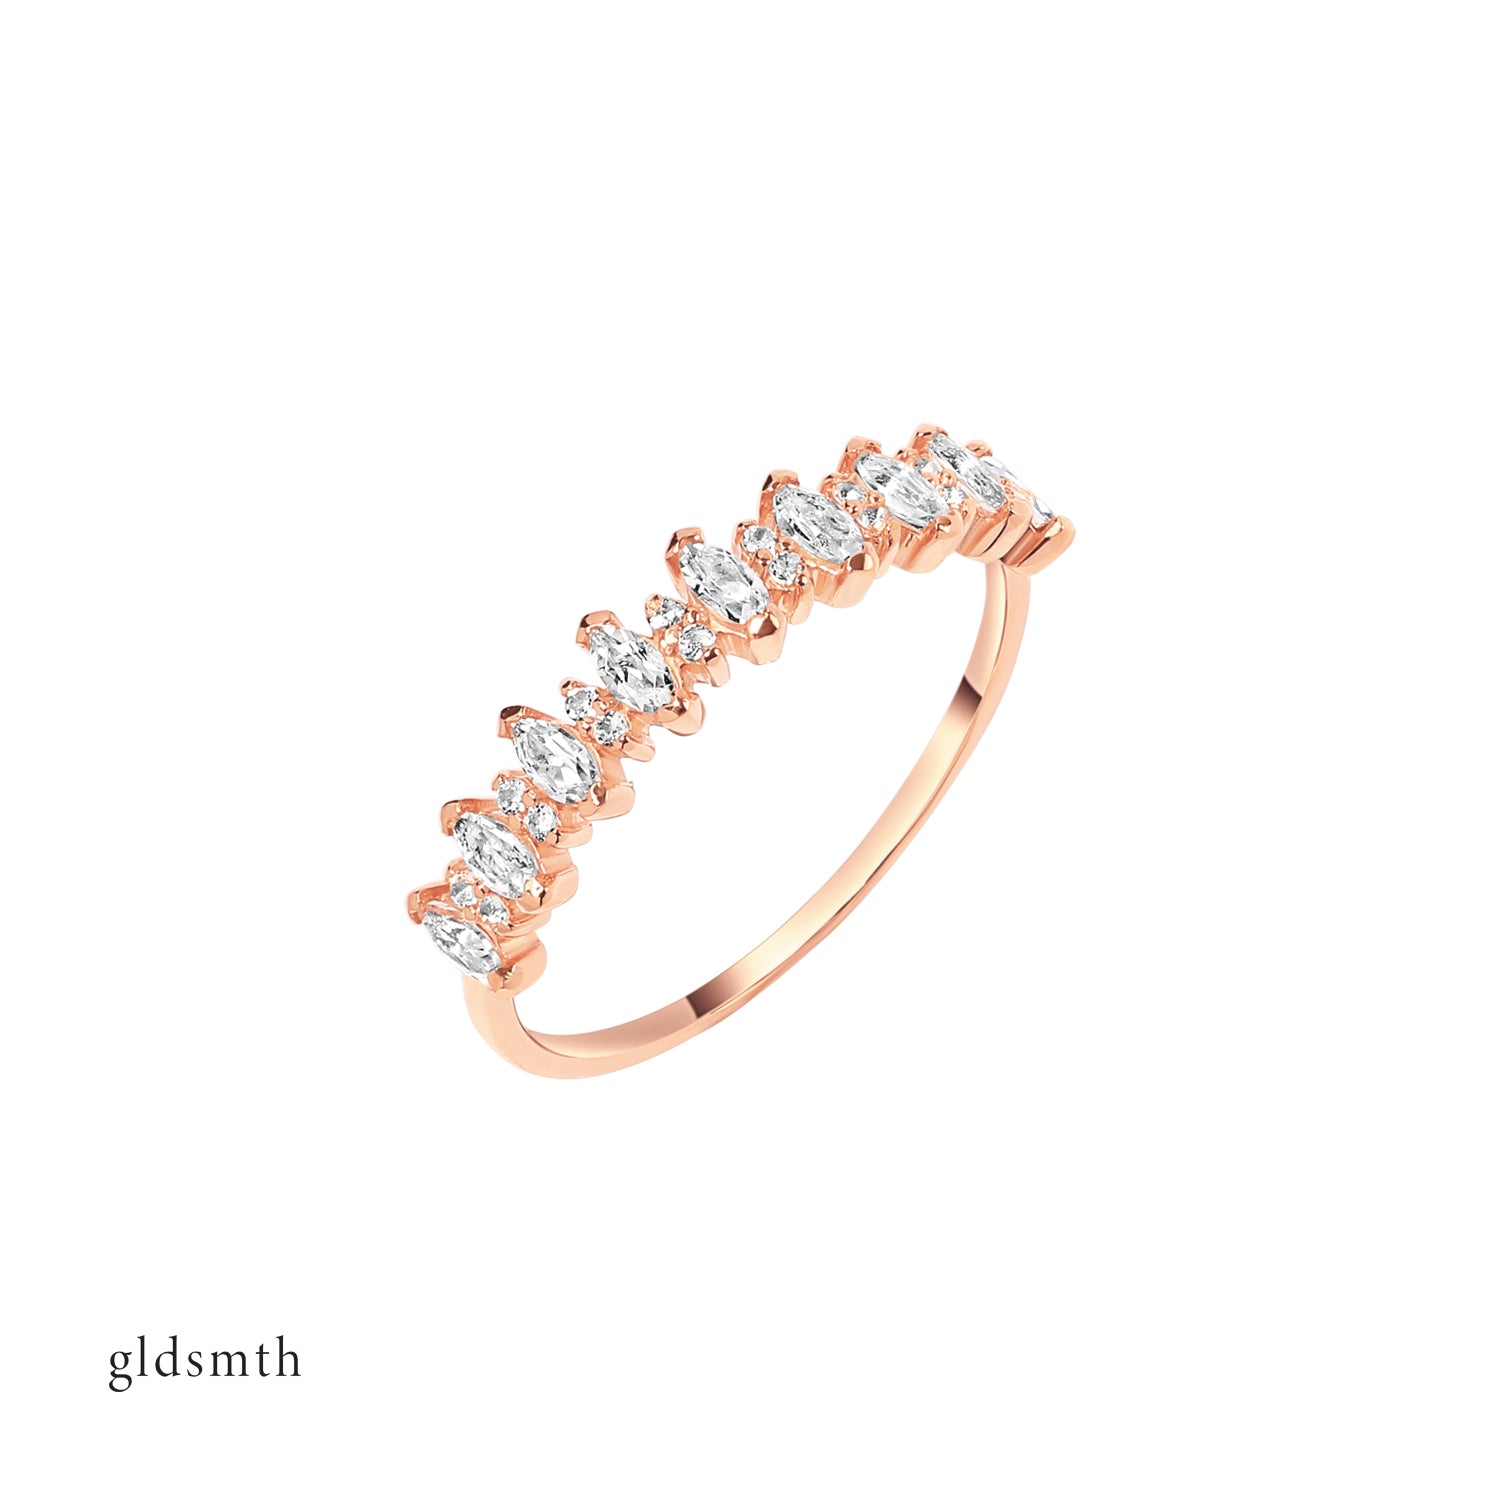 Elegant and statement ring. Handcrafted 14k solid rose gold ring with white topazes